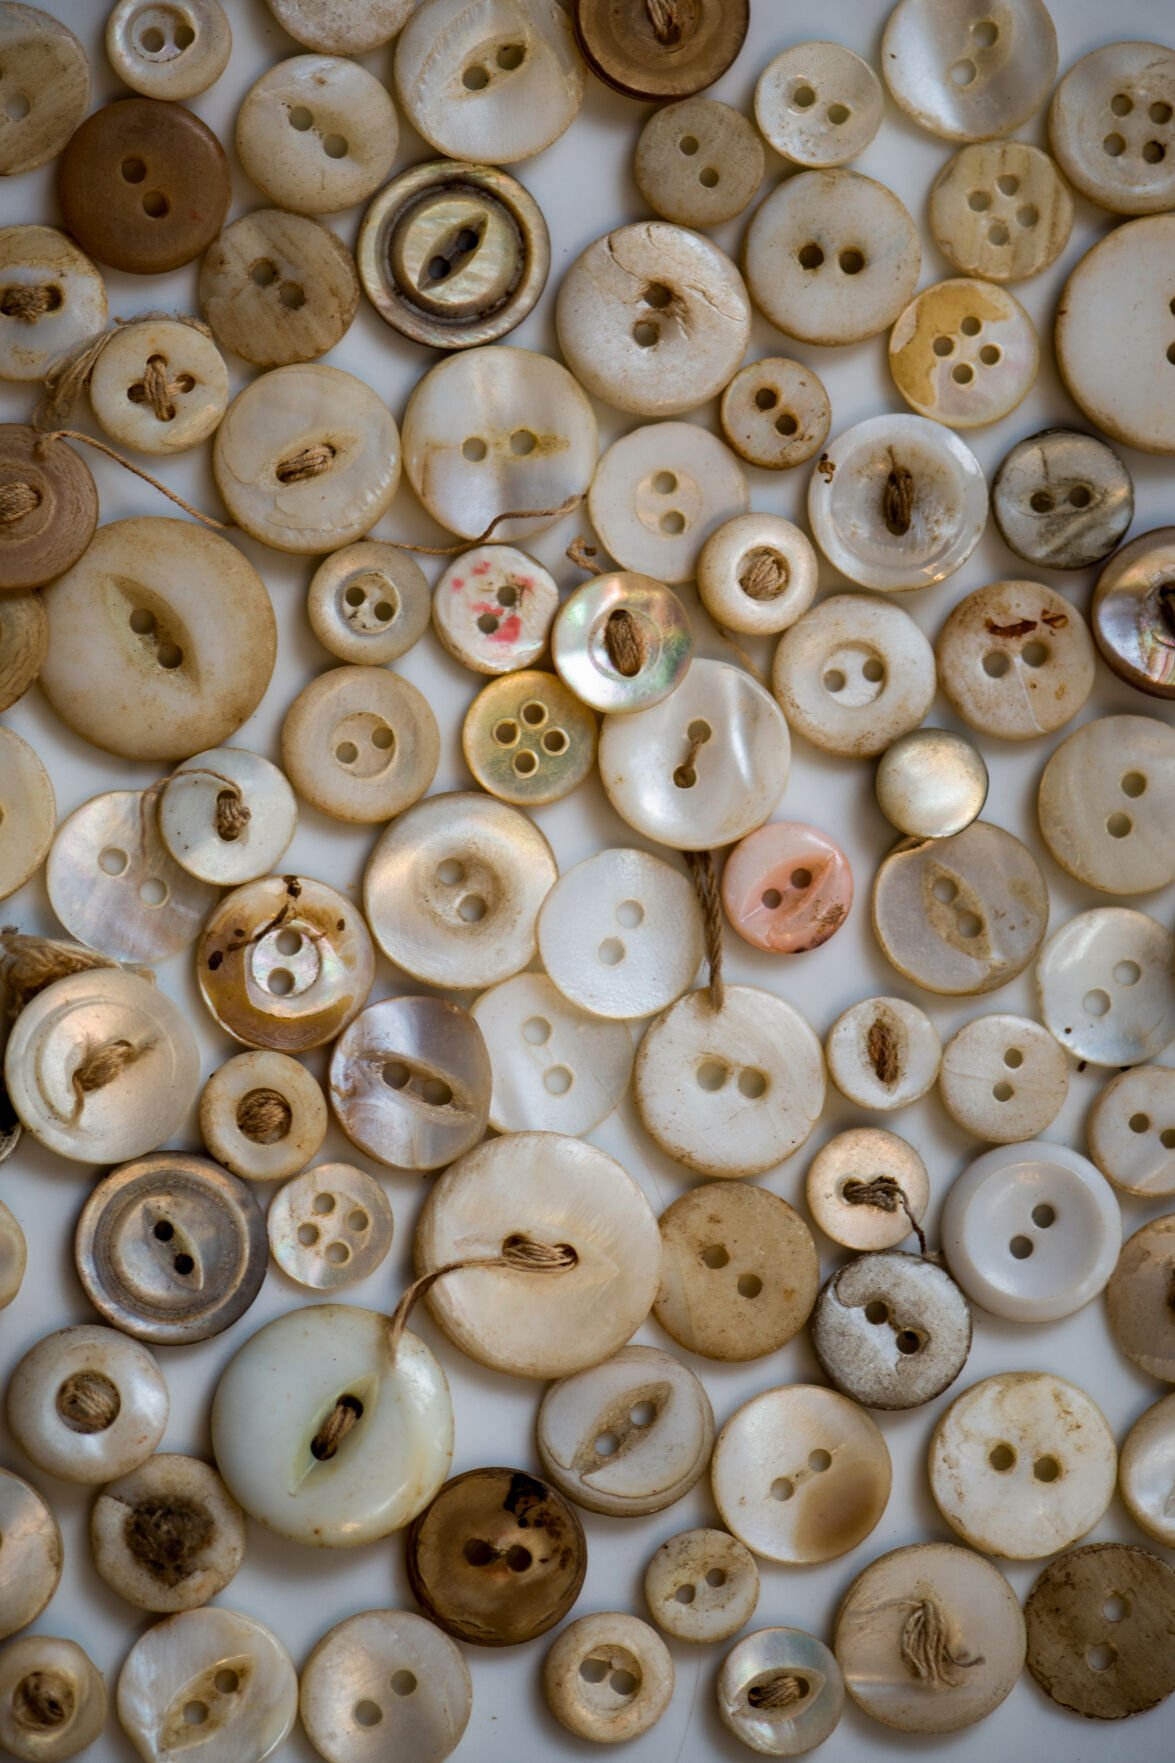 Antique pearl buttons from the collection of Nancy Tharpe